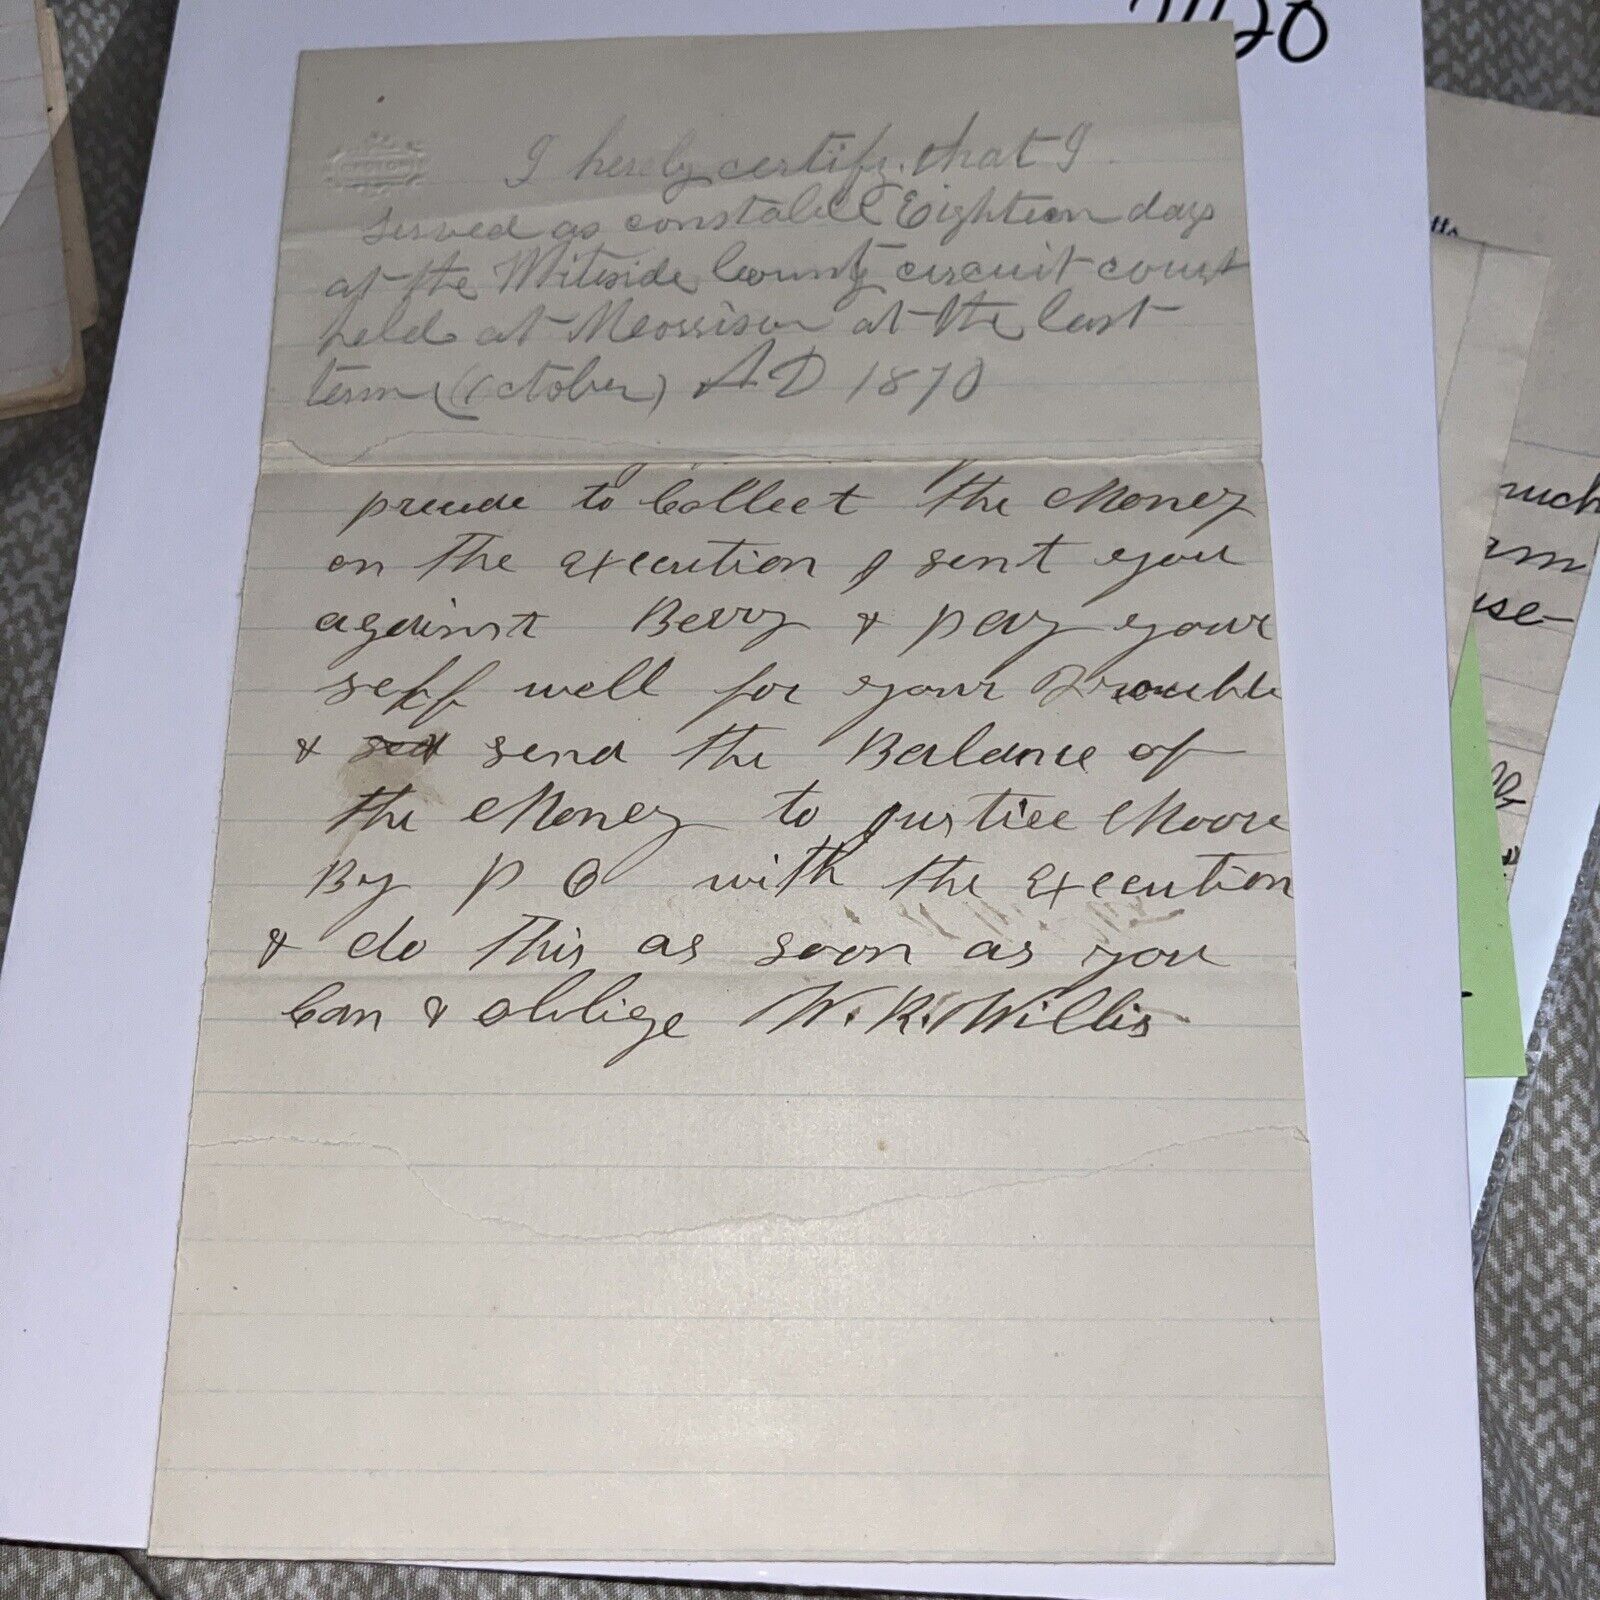 1870 Letter Certifying Days Worked as Constable, Whiteside County Circuit Court